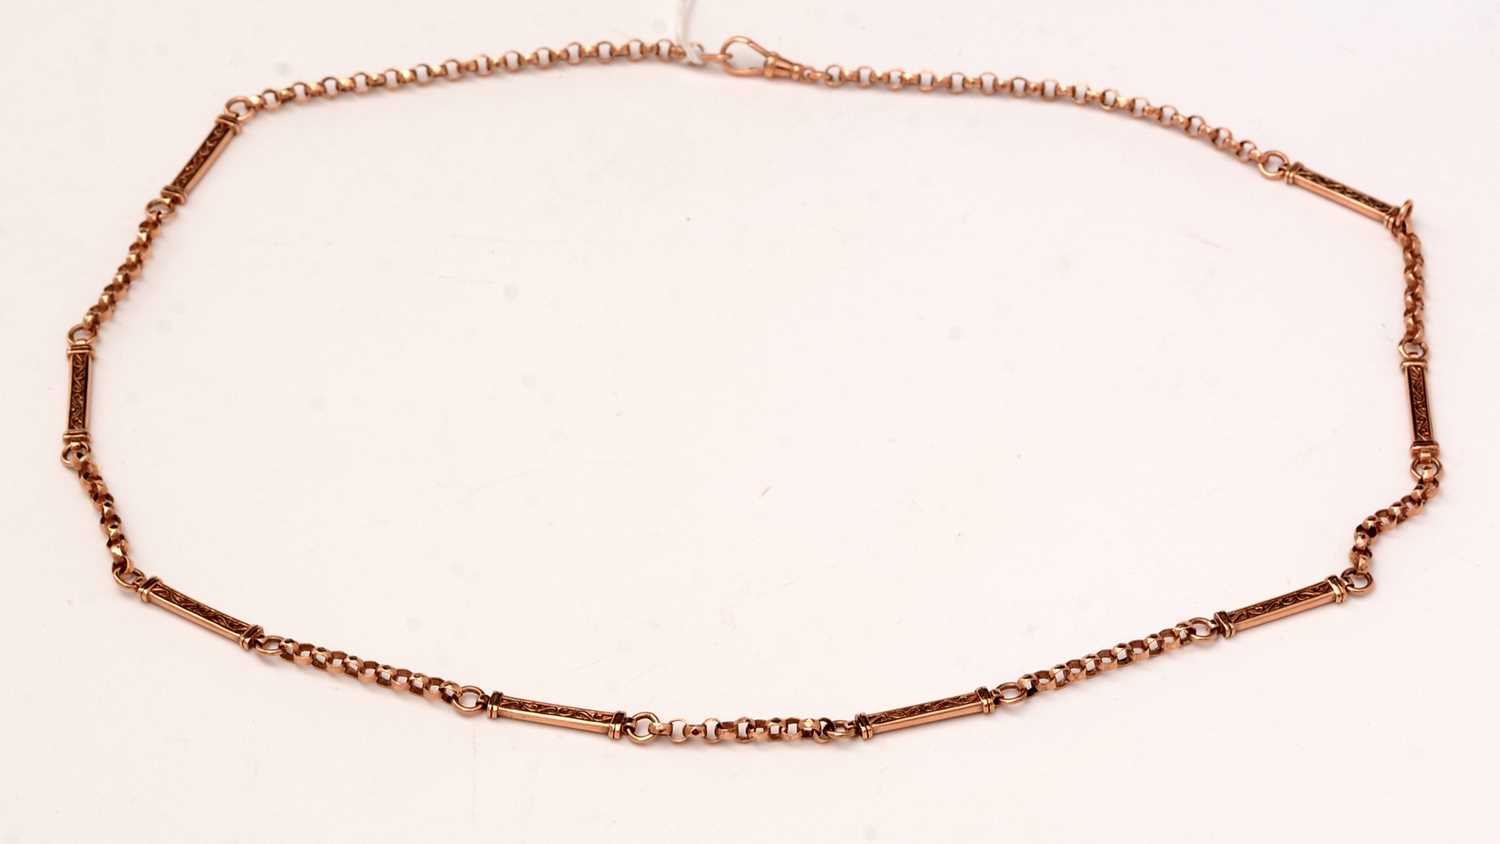 Lot 121 - A Victorian style 9ct rose gold fancy link watch chain